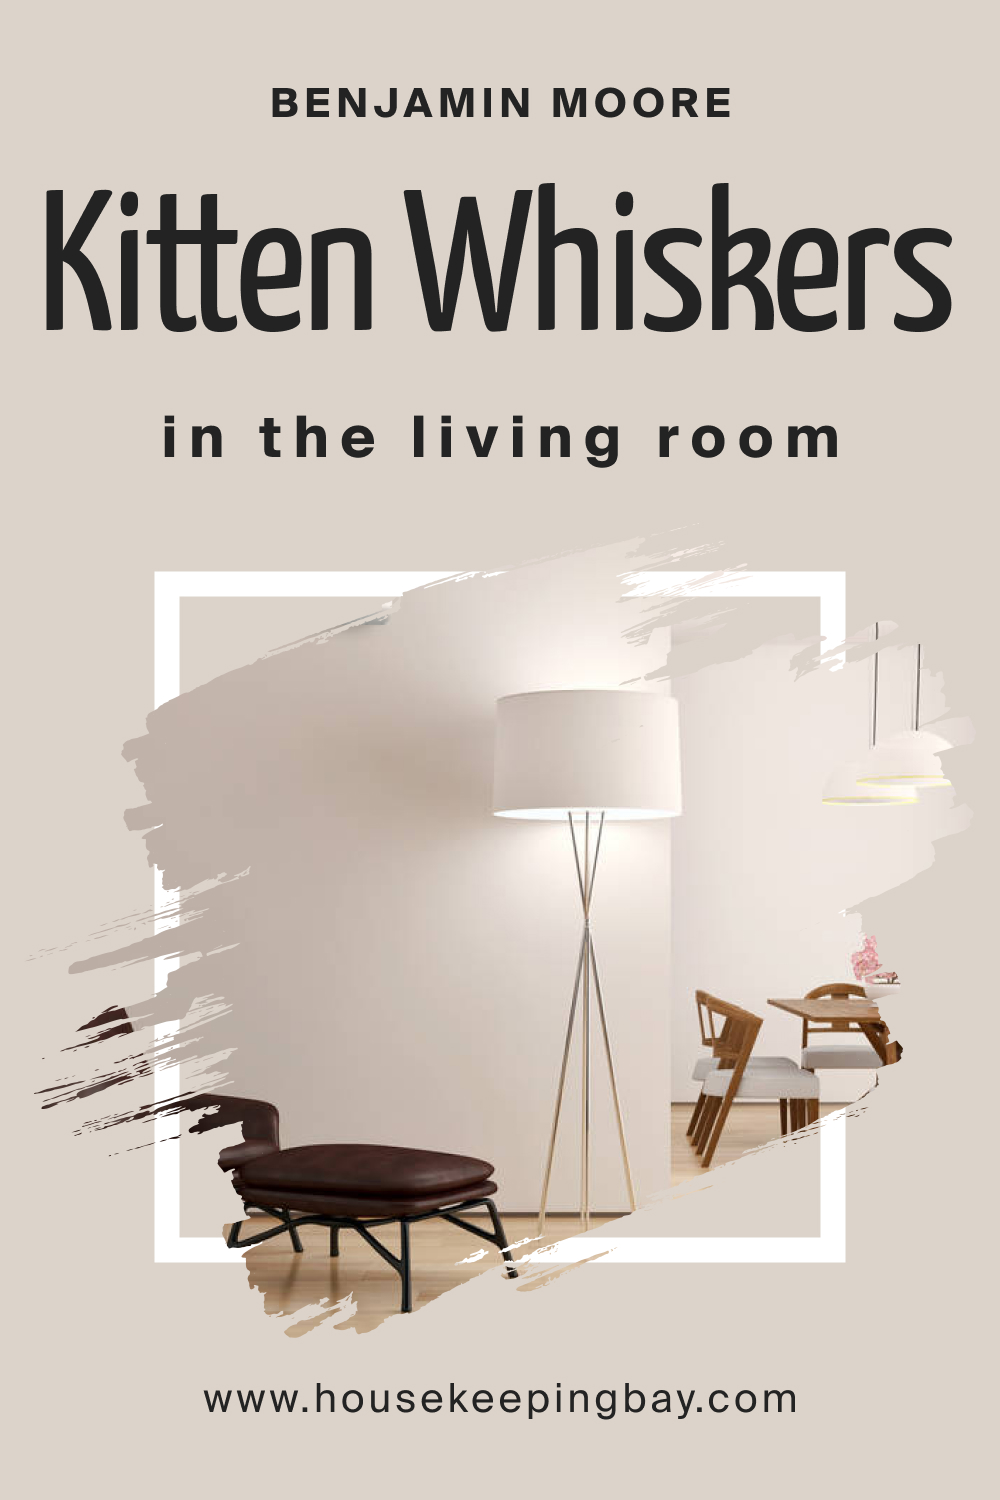 How to Use BM Kitten Whiskers 1003 in the Living Room?